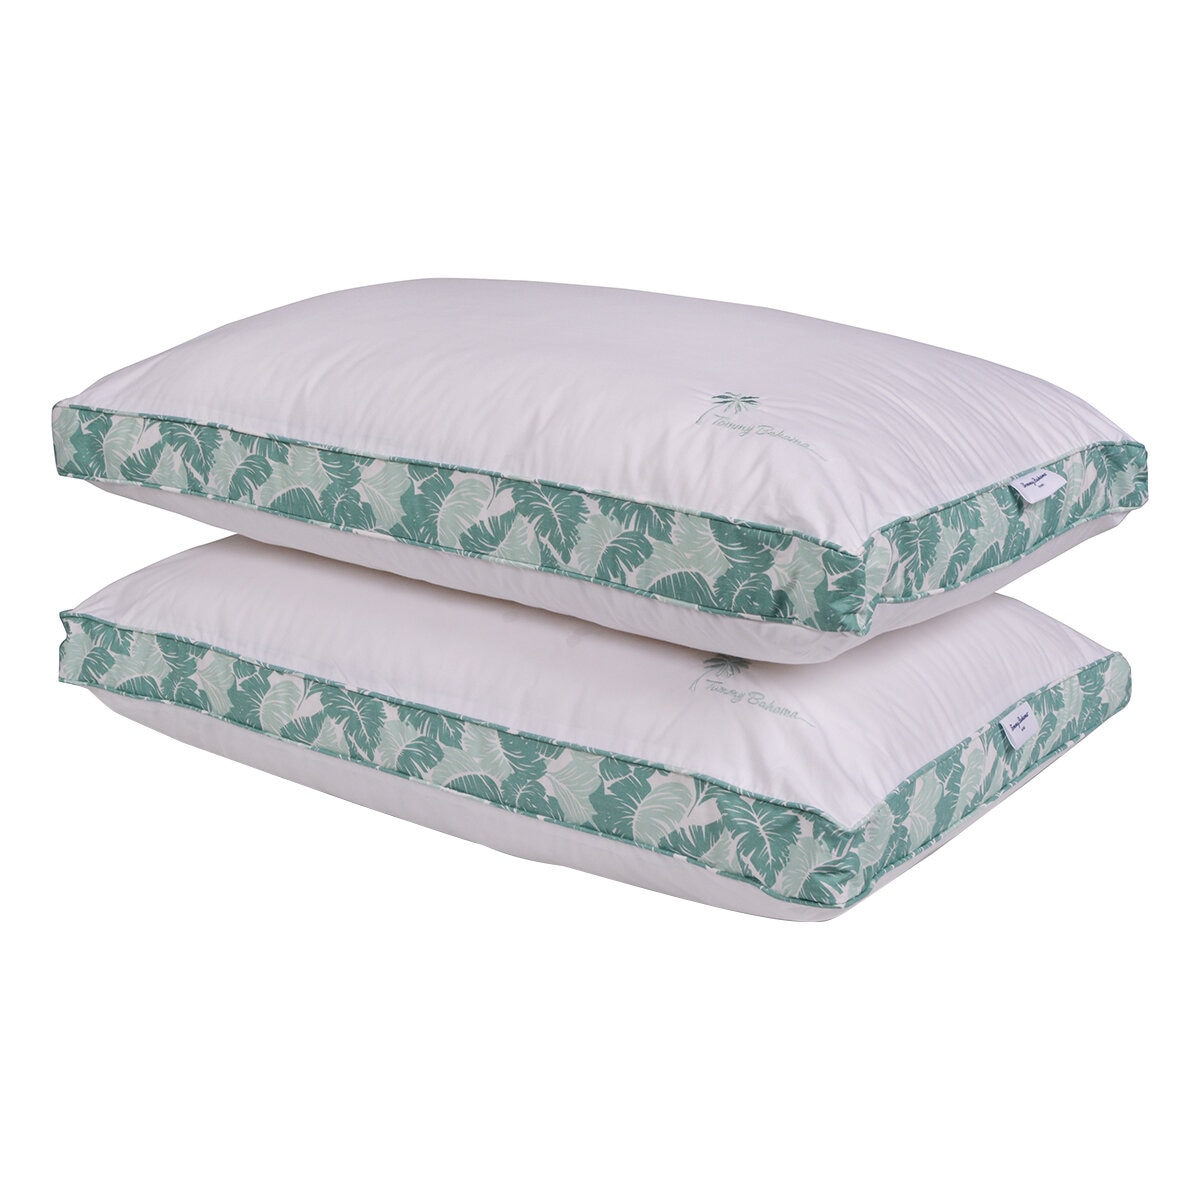 Tommy Bahama Down Alternative Pillows 2 Pack Paradise Palms